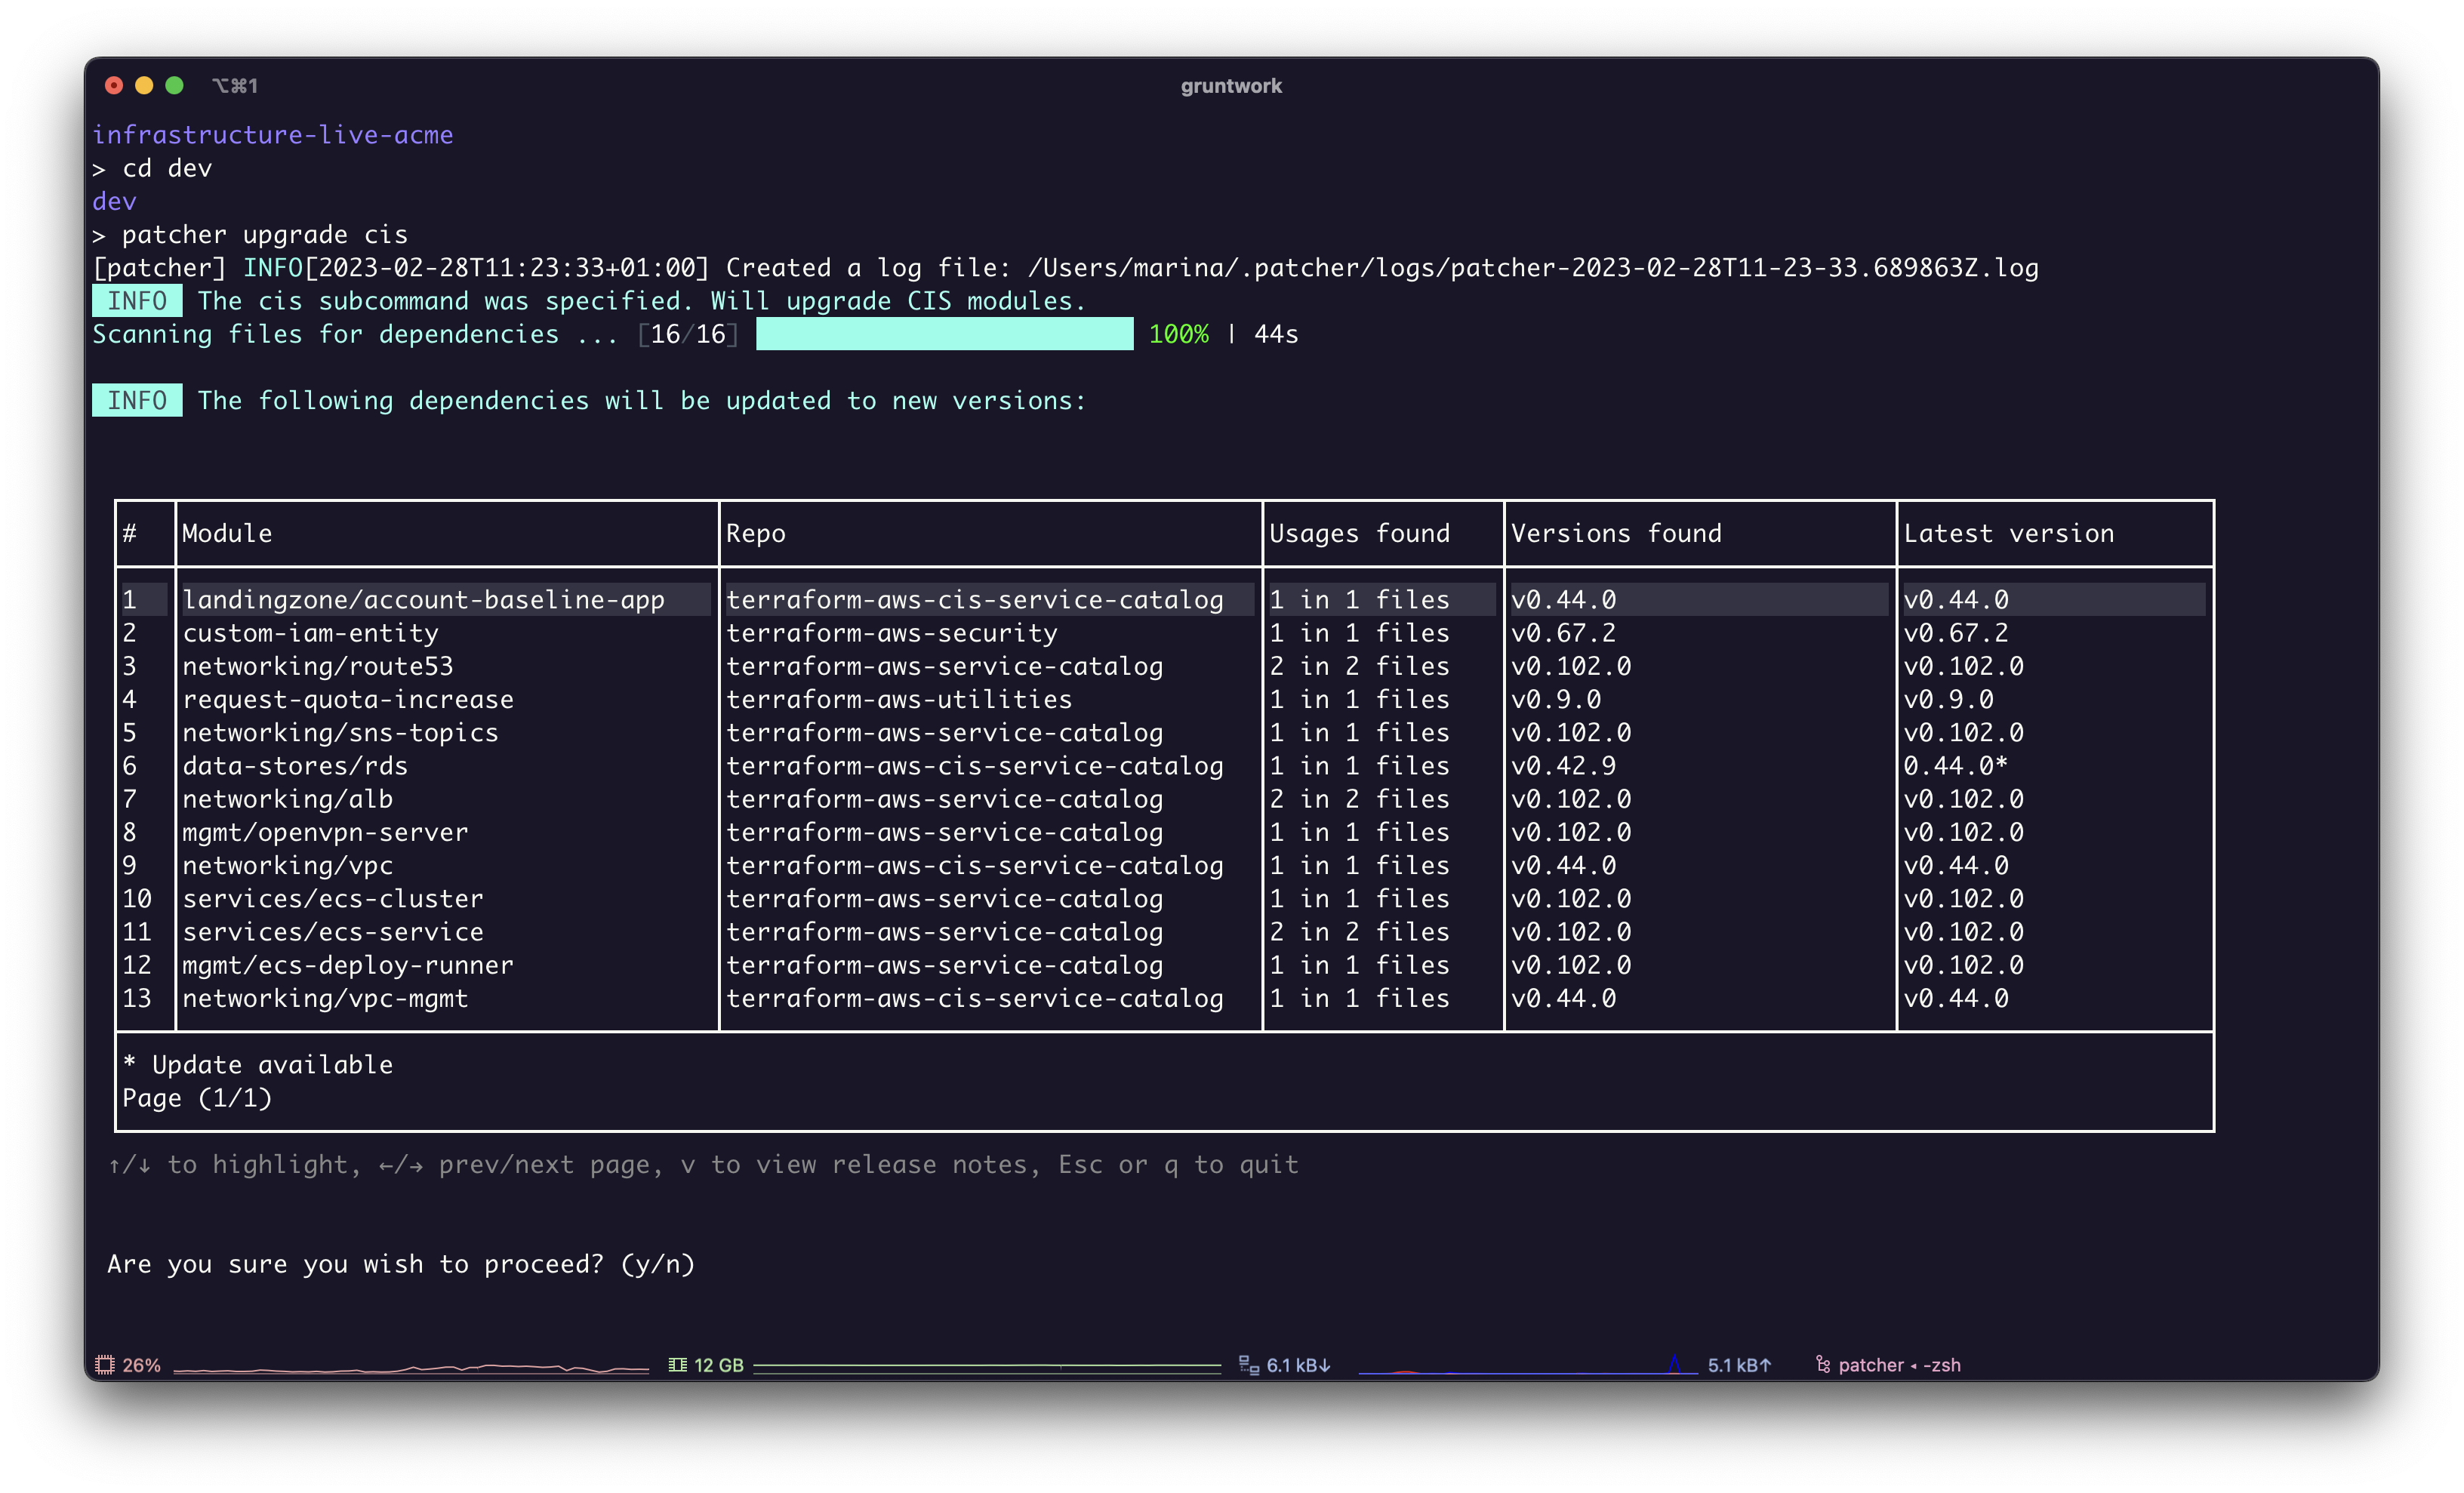 Screenshot of Patcher with a list of modules in an infrastructure-live repo.